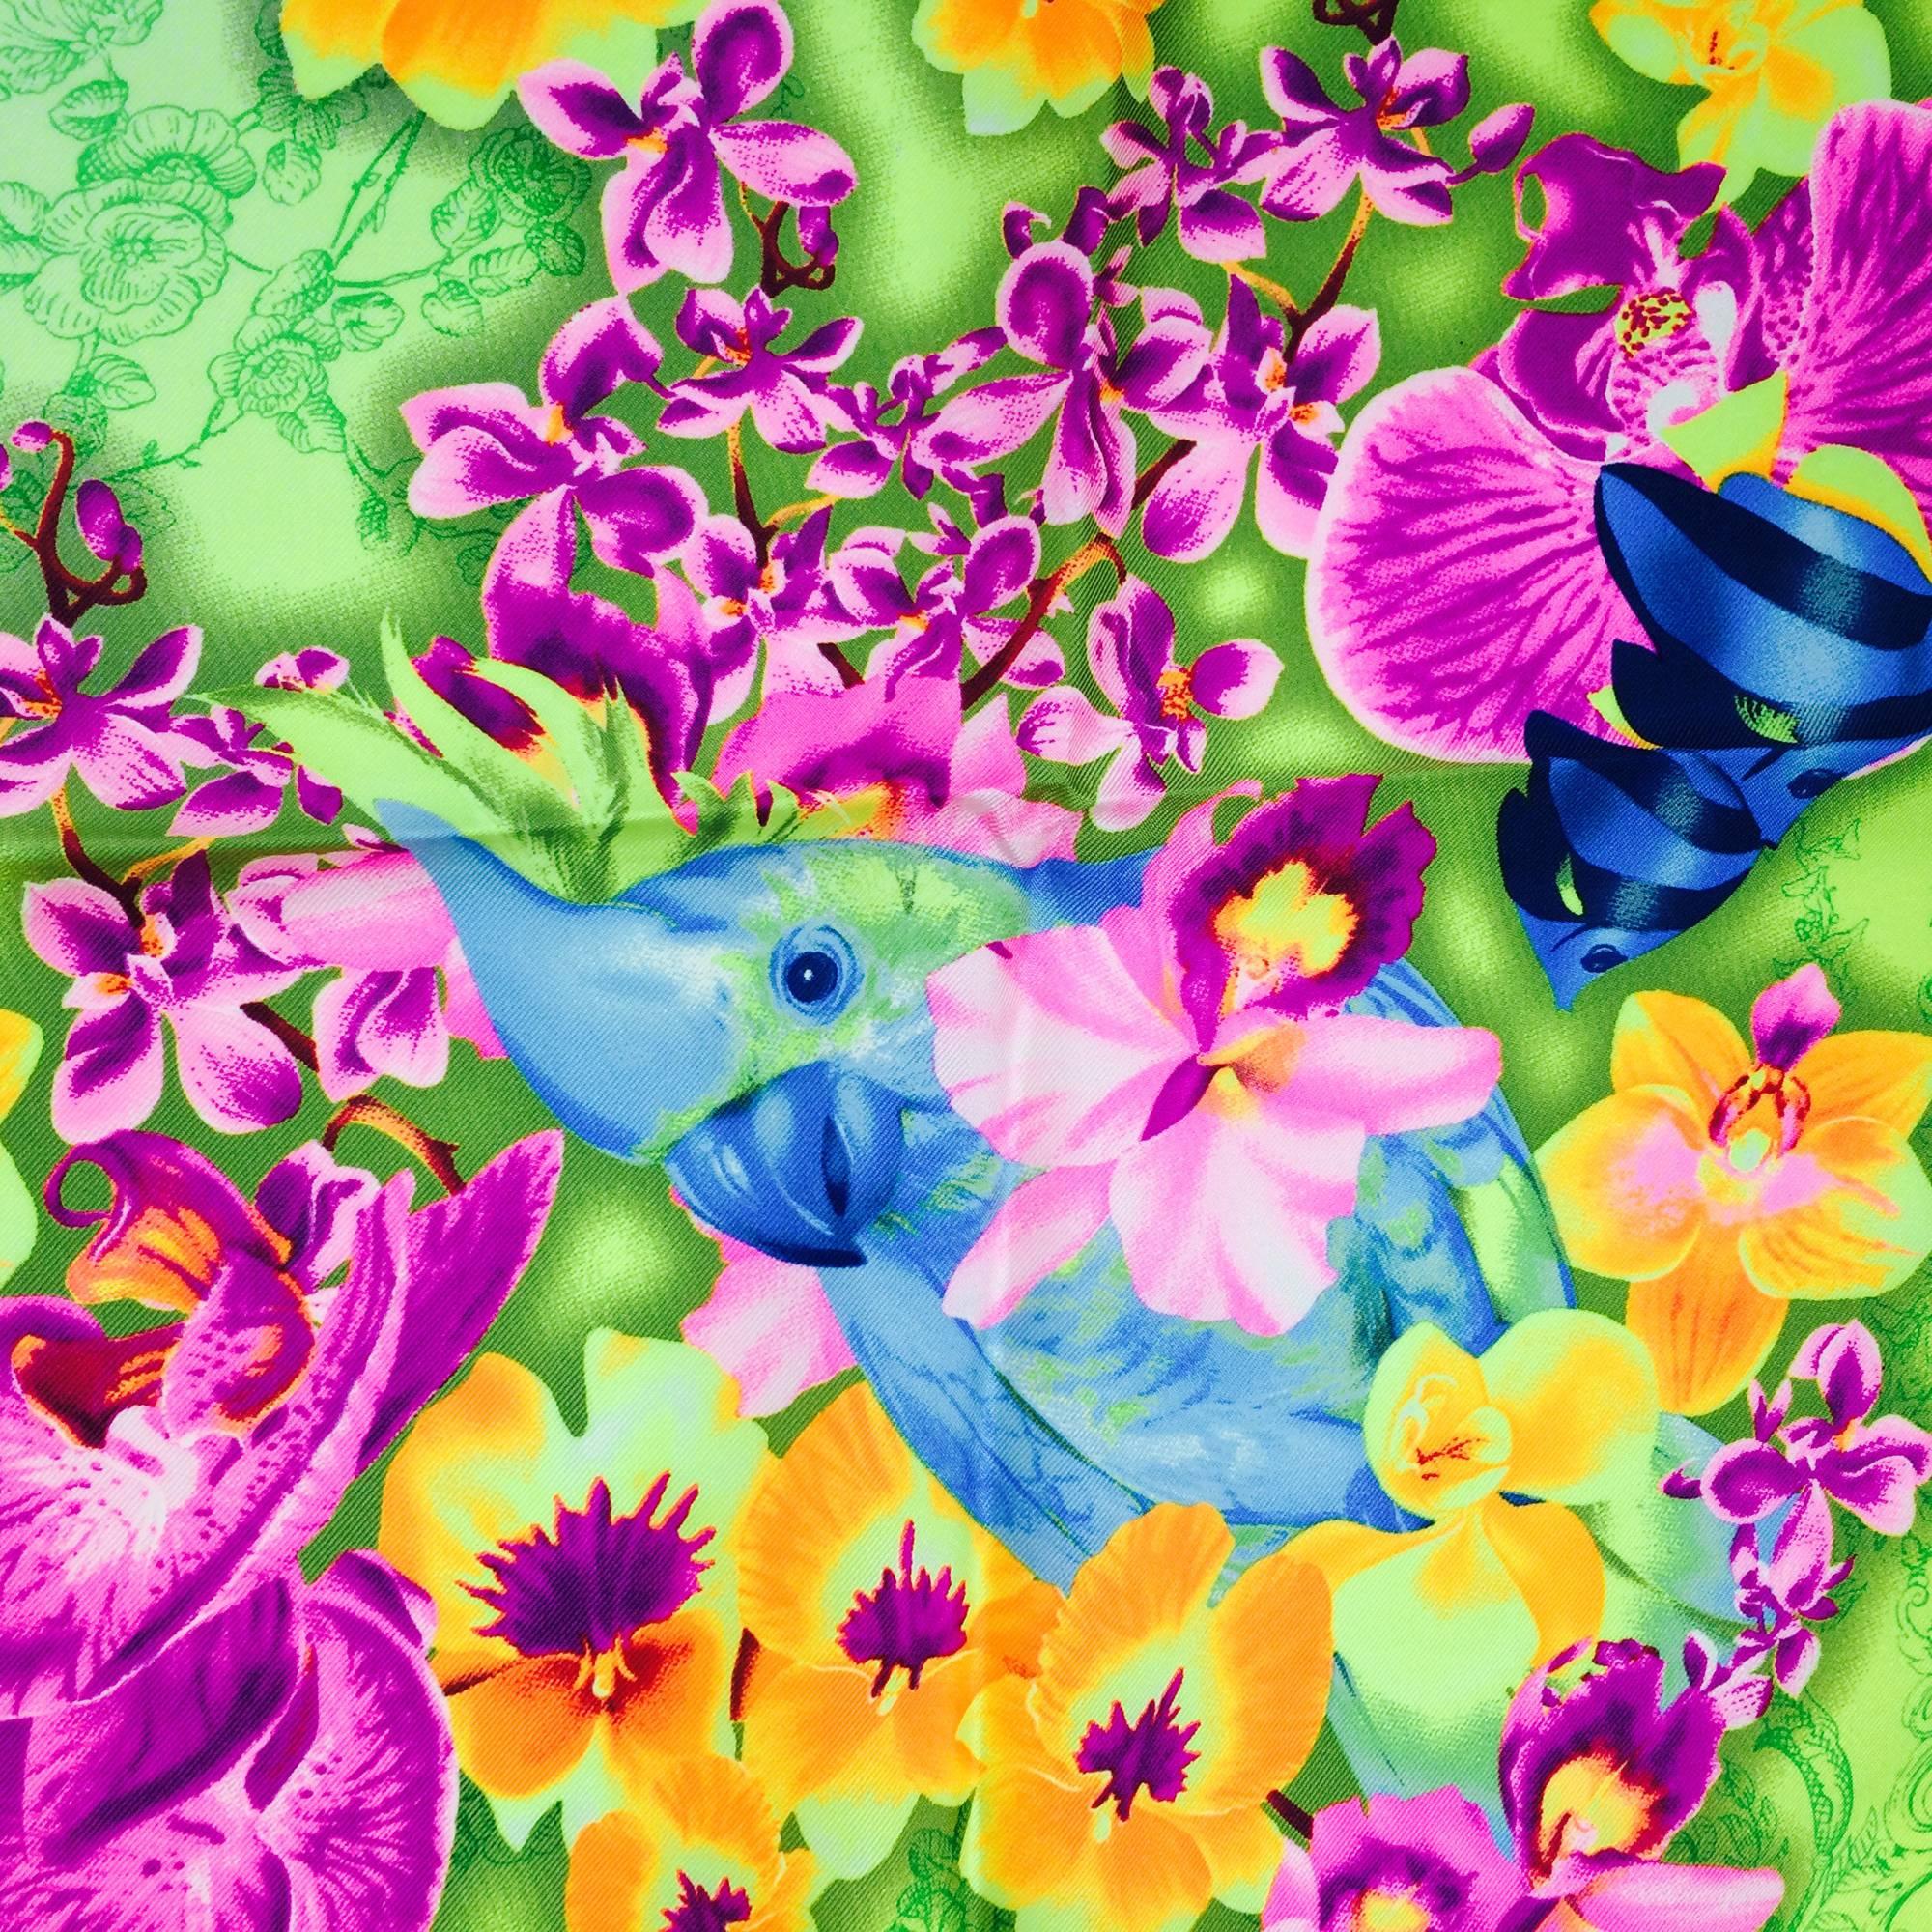 Versace DV Donatella Versace orchid & sea life silk scarf...The center of the scarf is done in a green and white line drawing of Donatella Versace surrounded by cherubs, the outer border is neon yellow-green with brightly coloured orchids & tropical